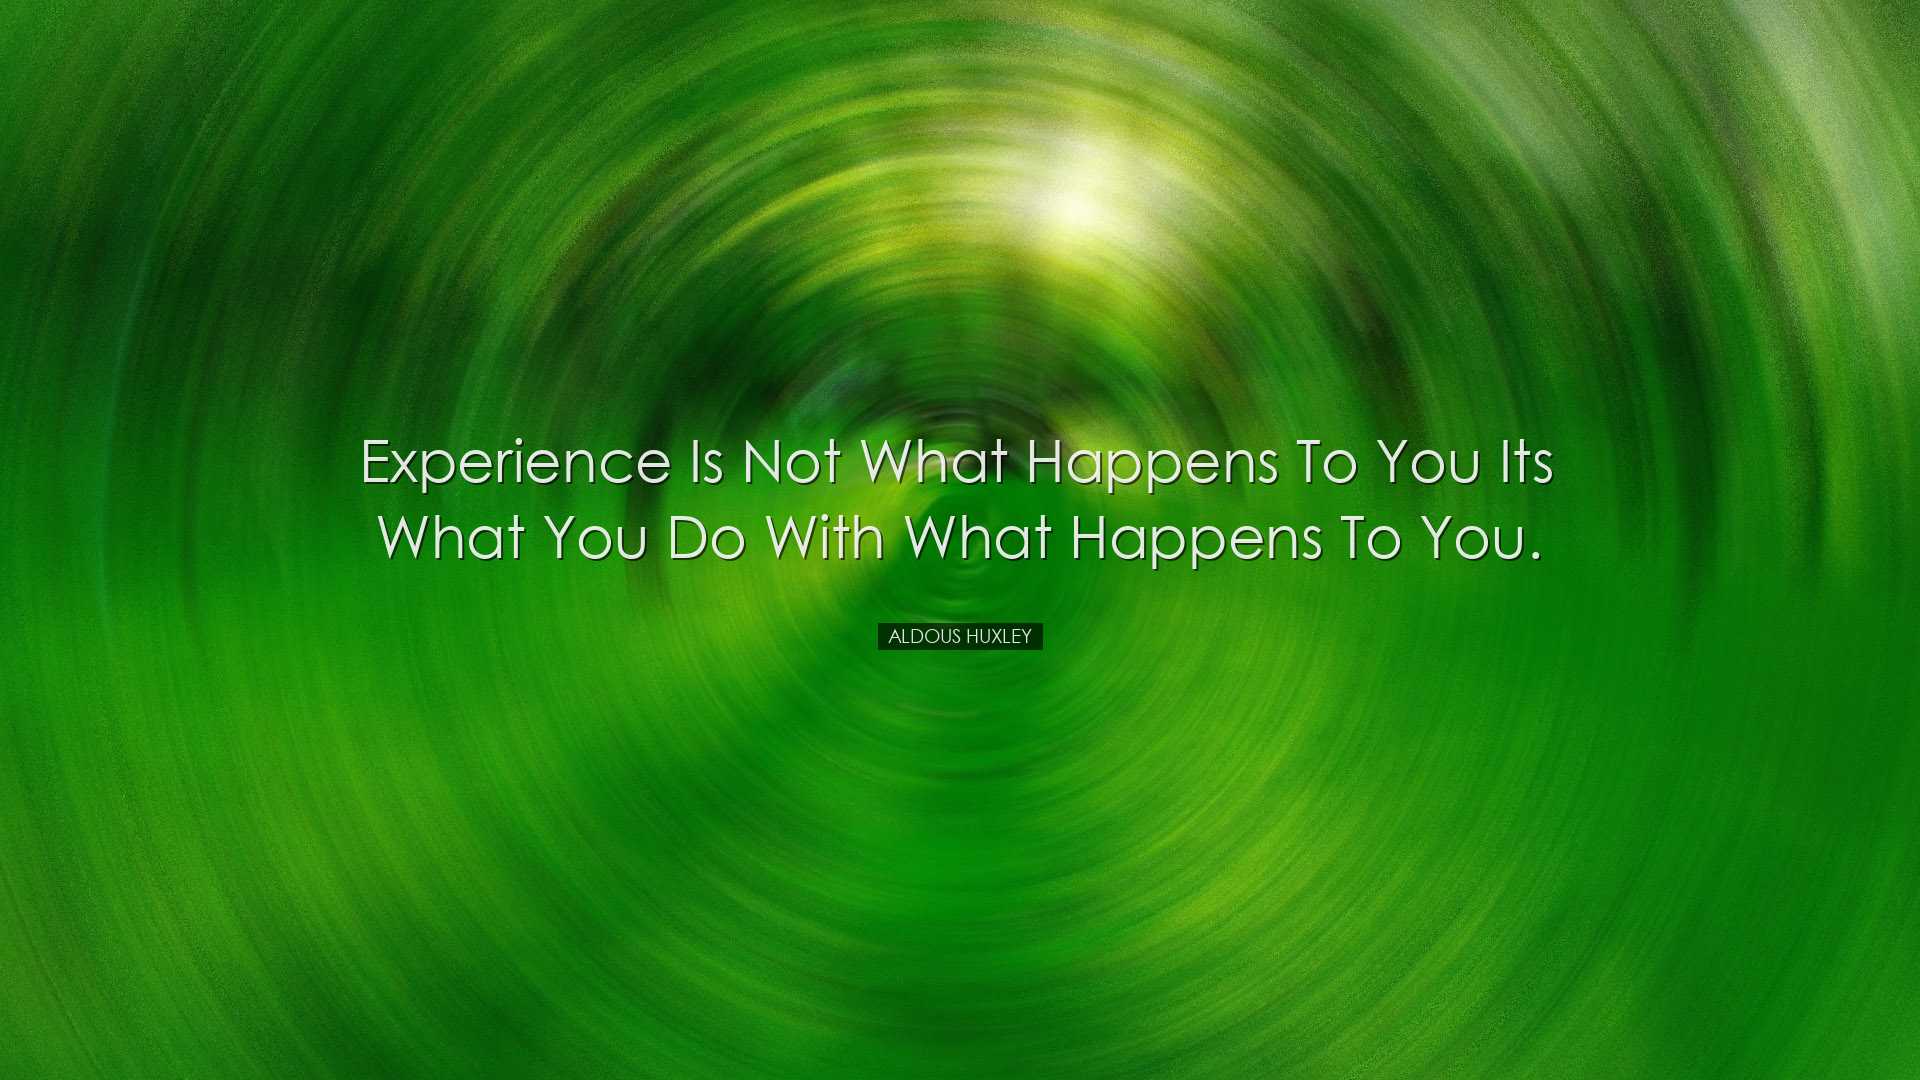 Experience is not what happens to you its what you do with what ha